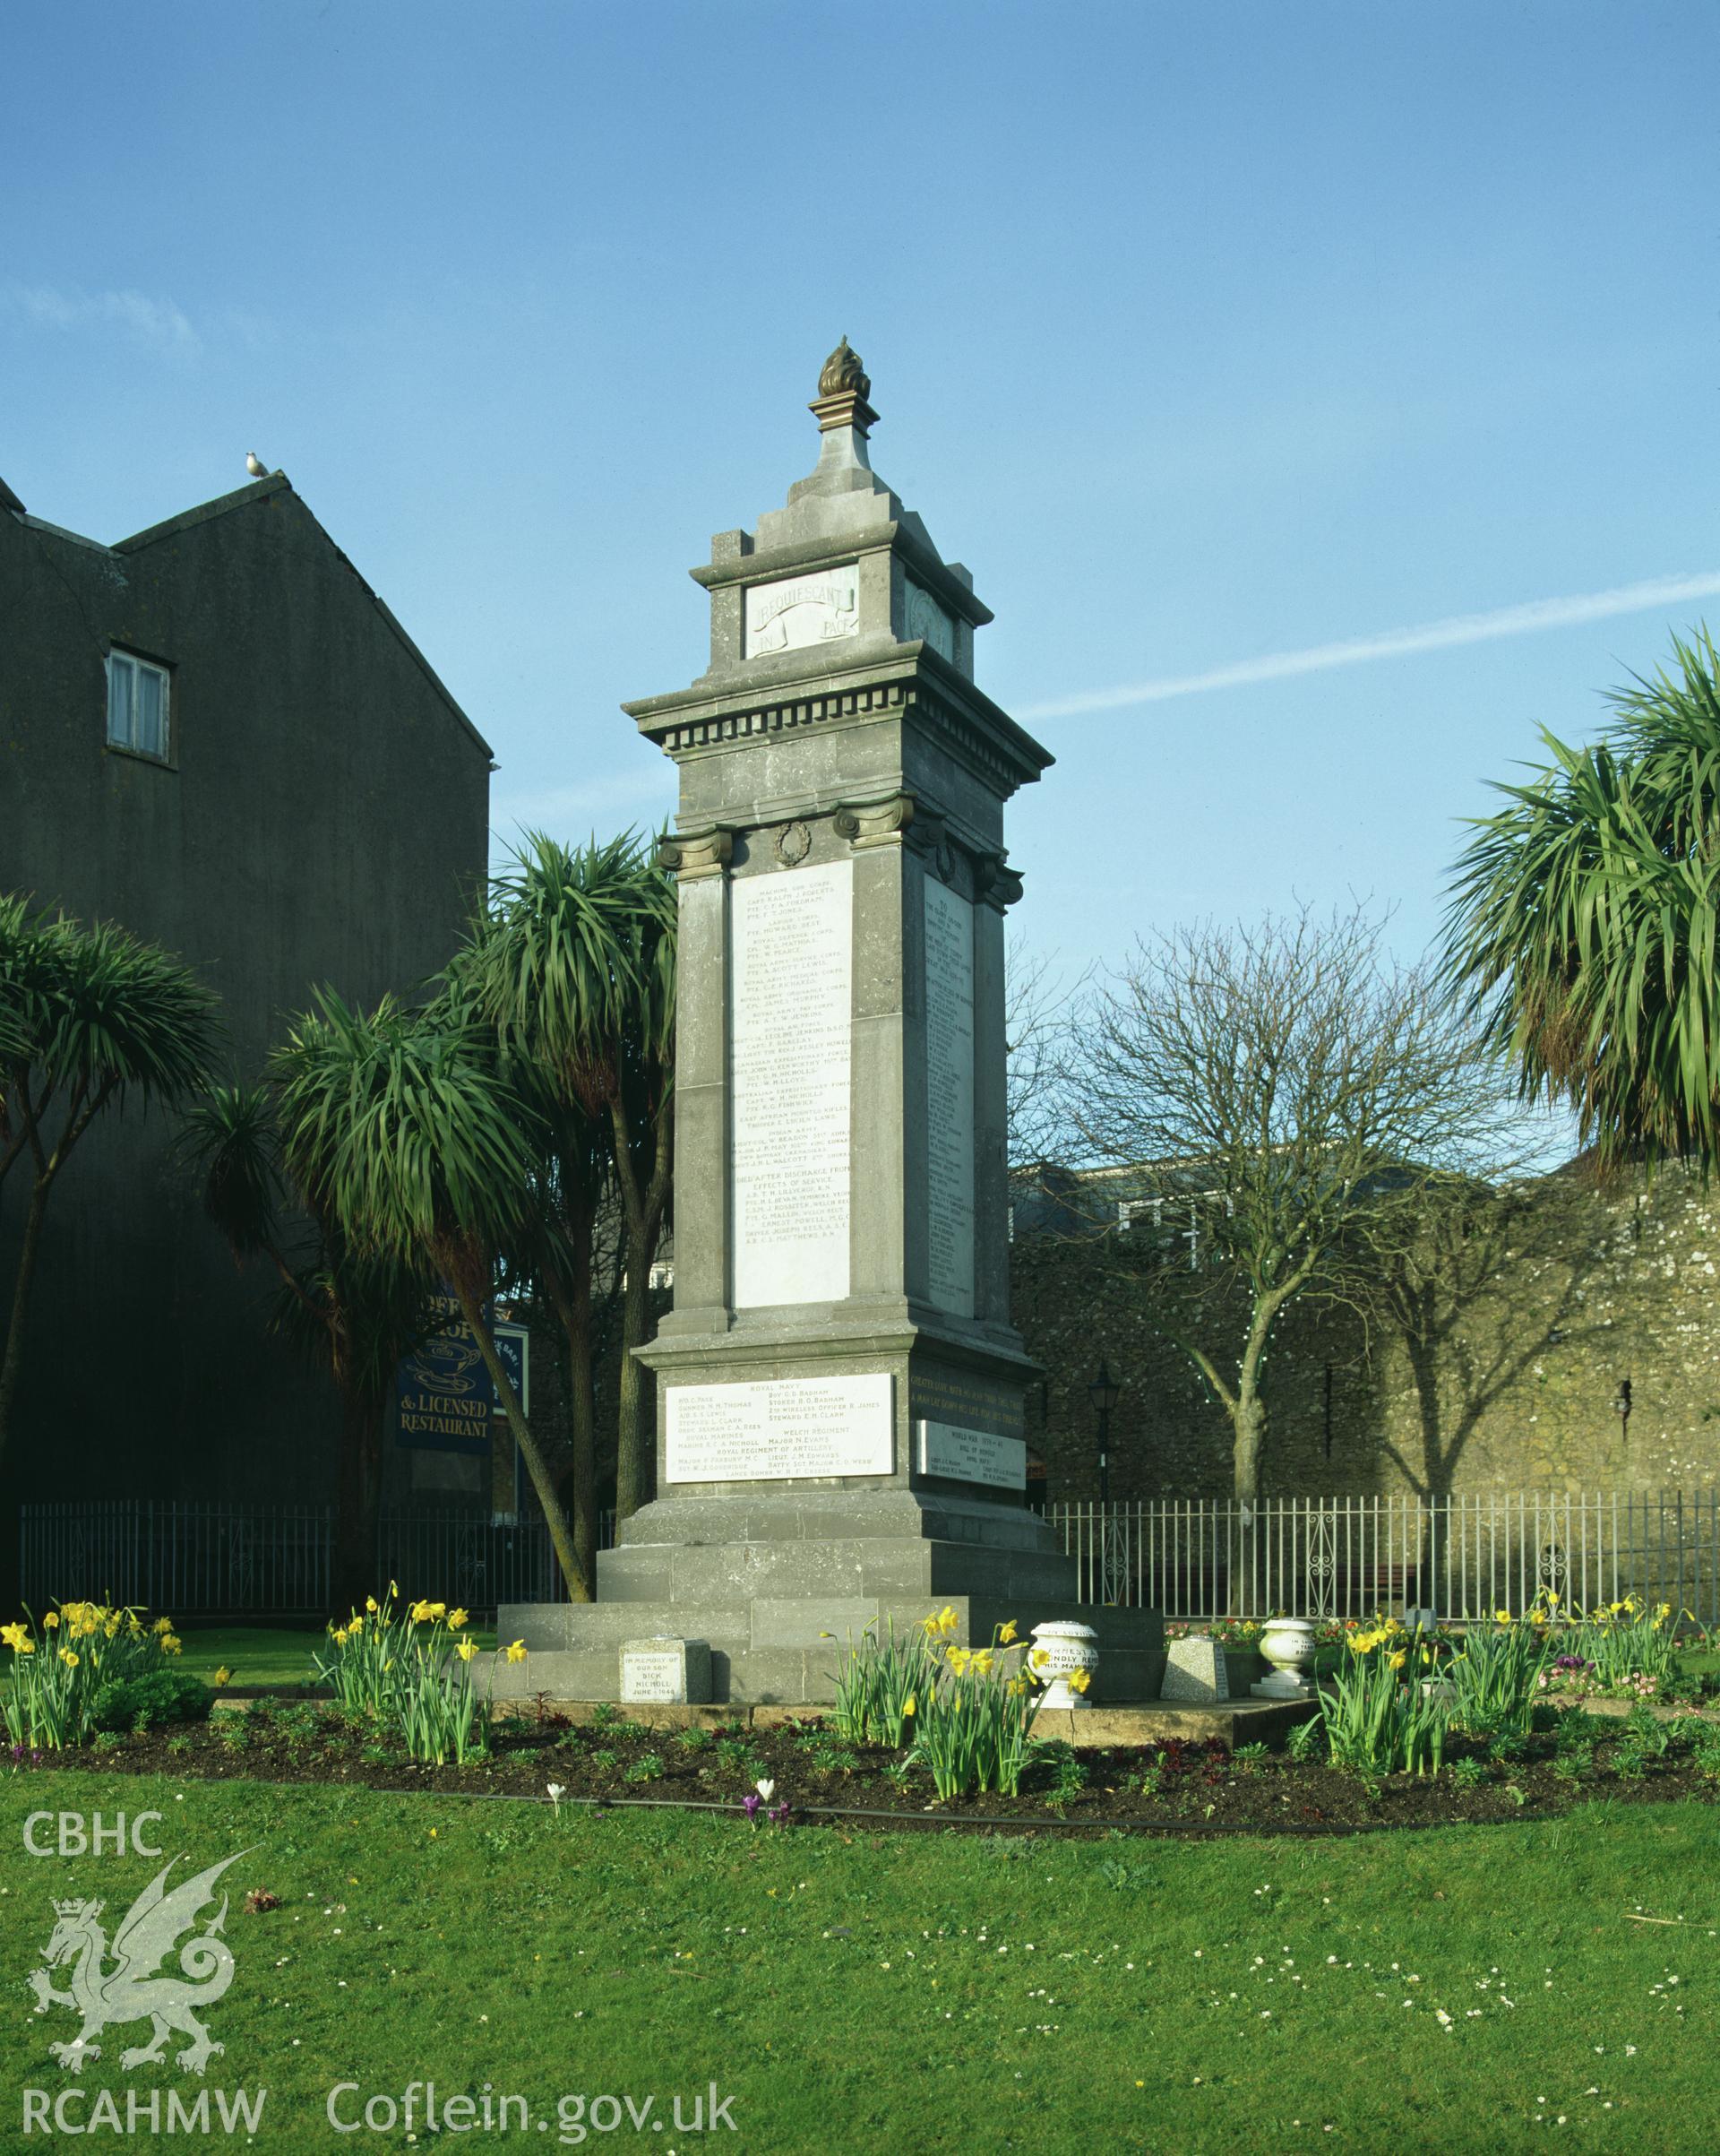 RCAHMW colour transparency showing the War Memorial, Tenby, taken by Iain Wright, 2003.